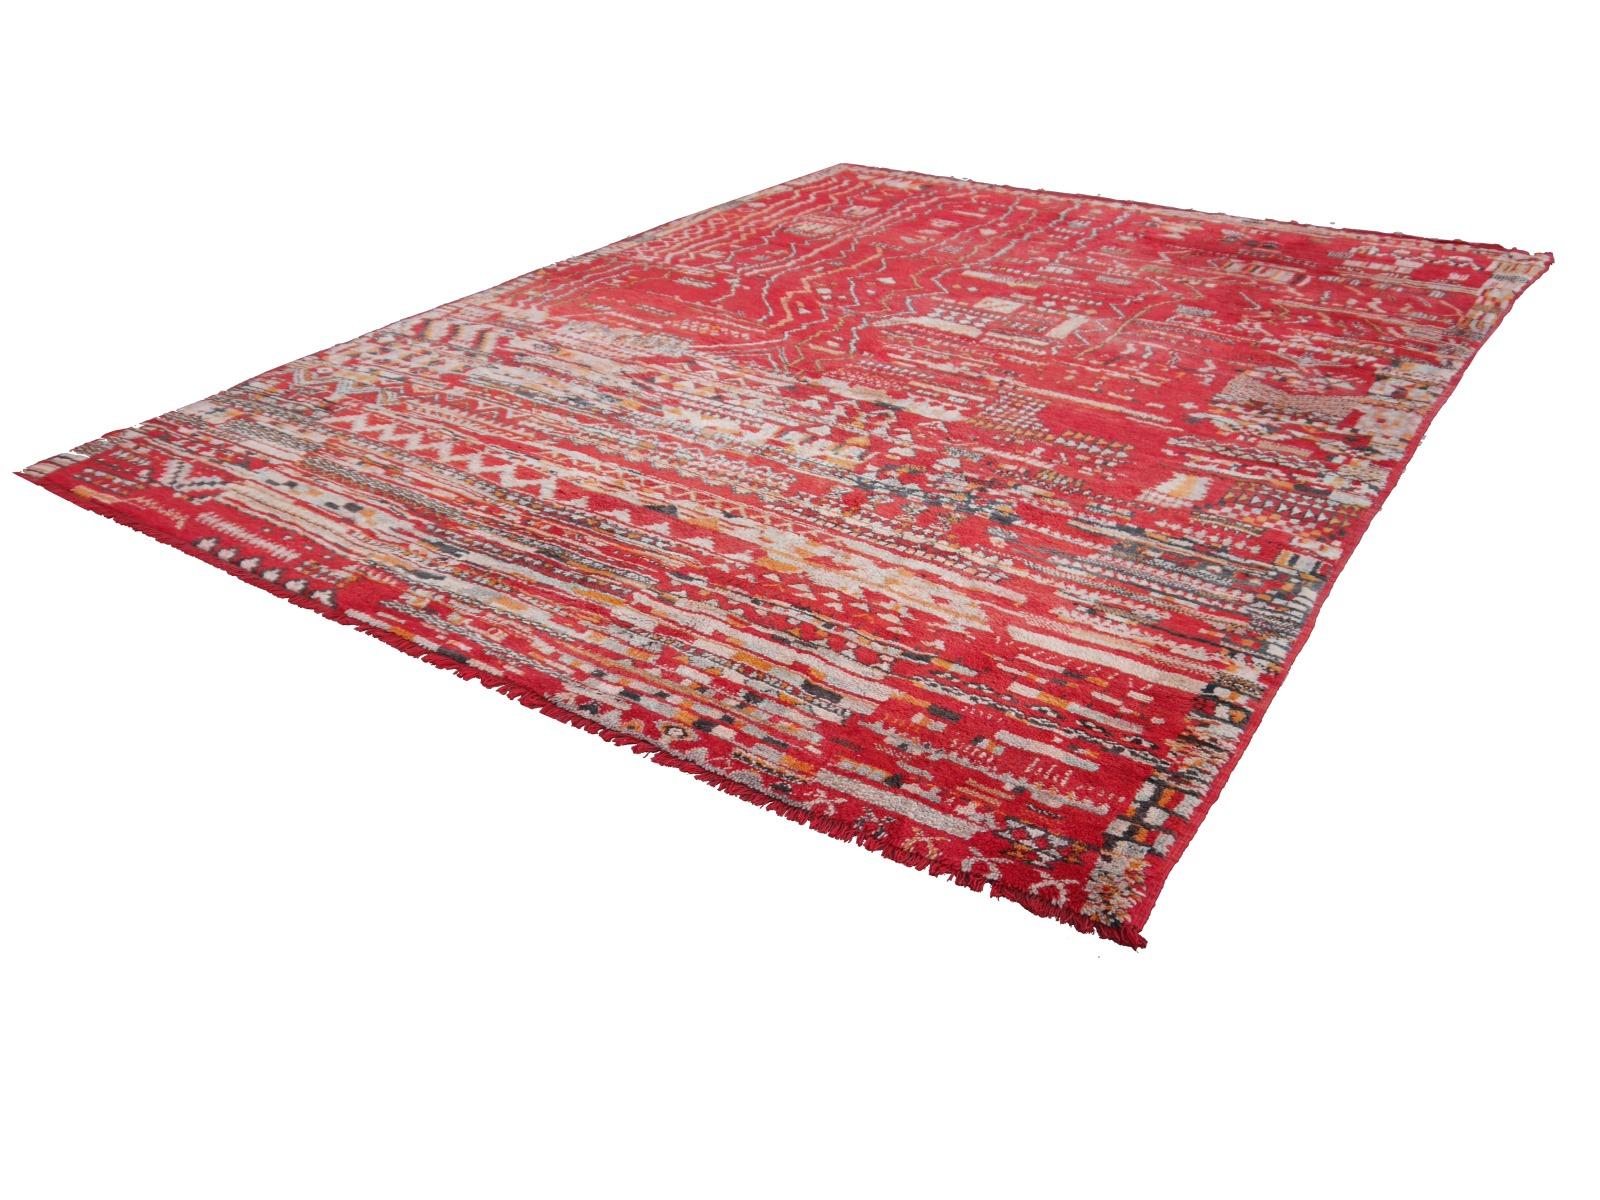 Late 20th Century Large Red Moroccan Vintage Rug North African Tribal Design Djoharian Collection For Sale